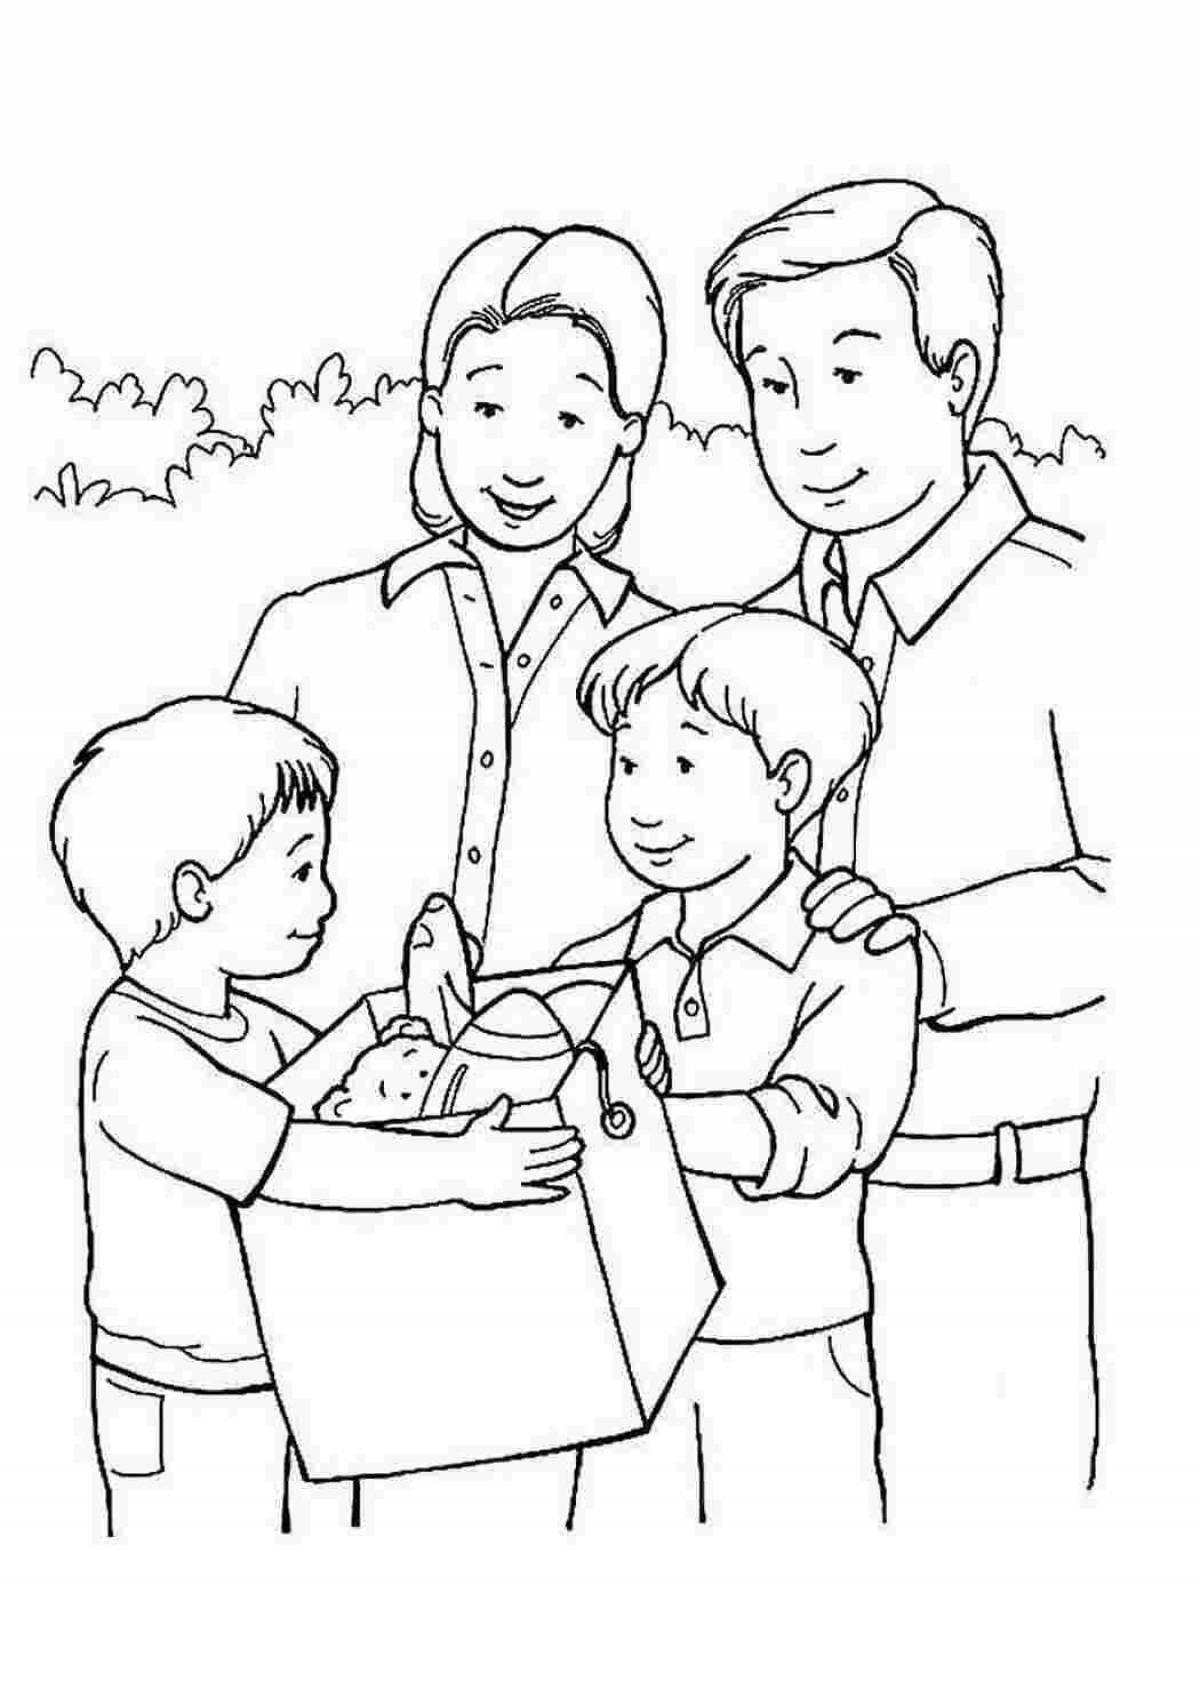 Fun coloring pages for parents